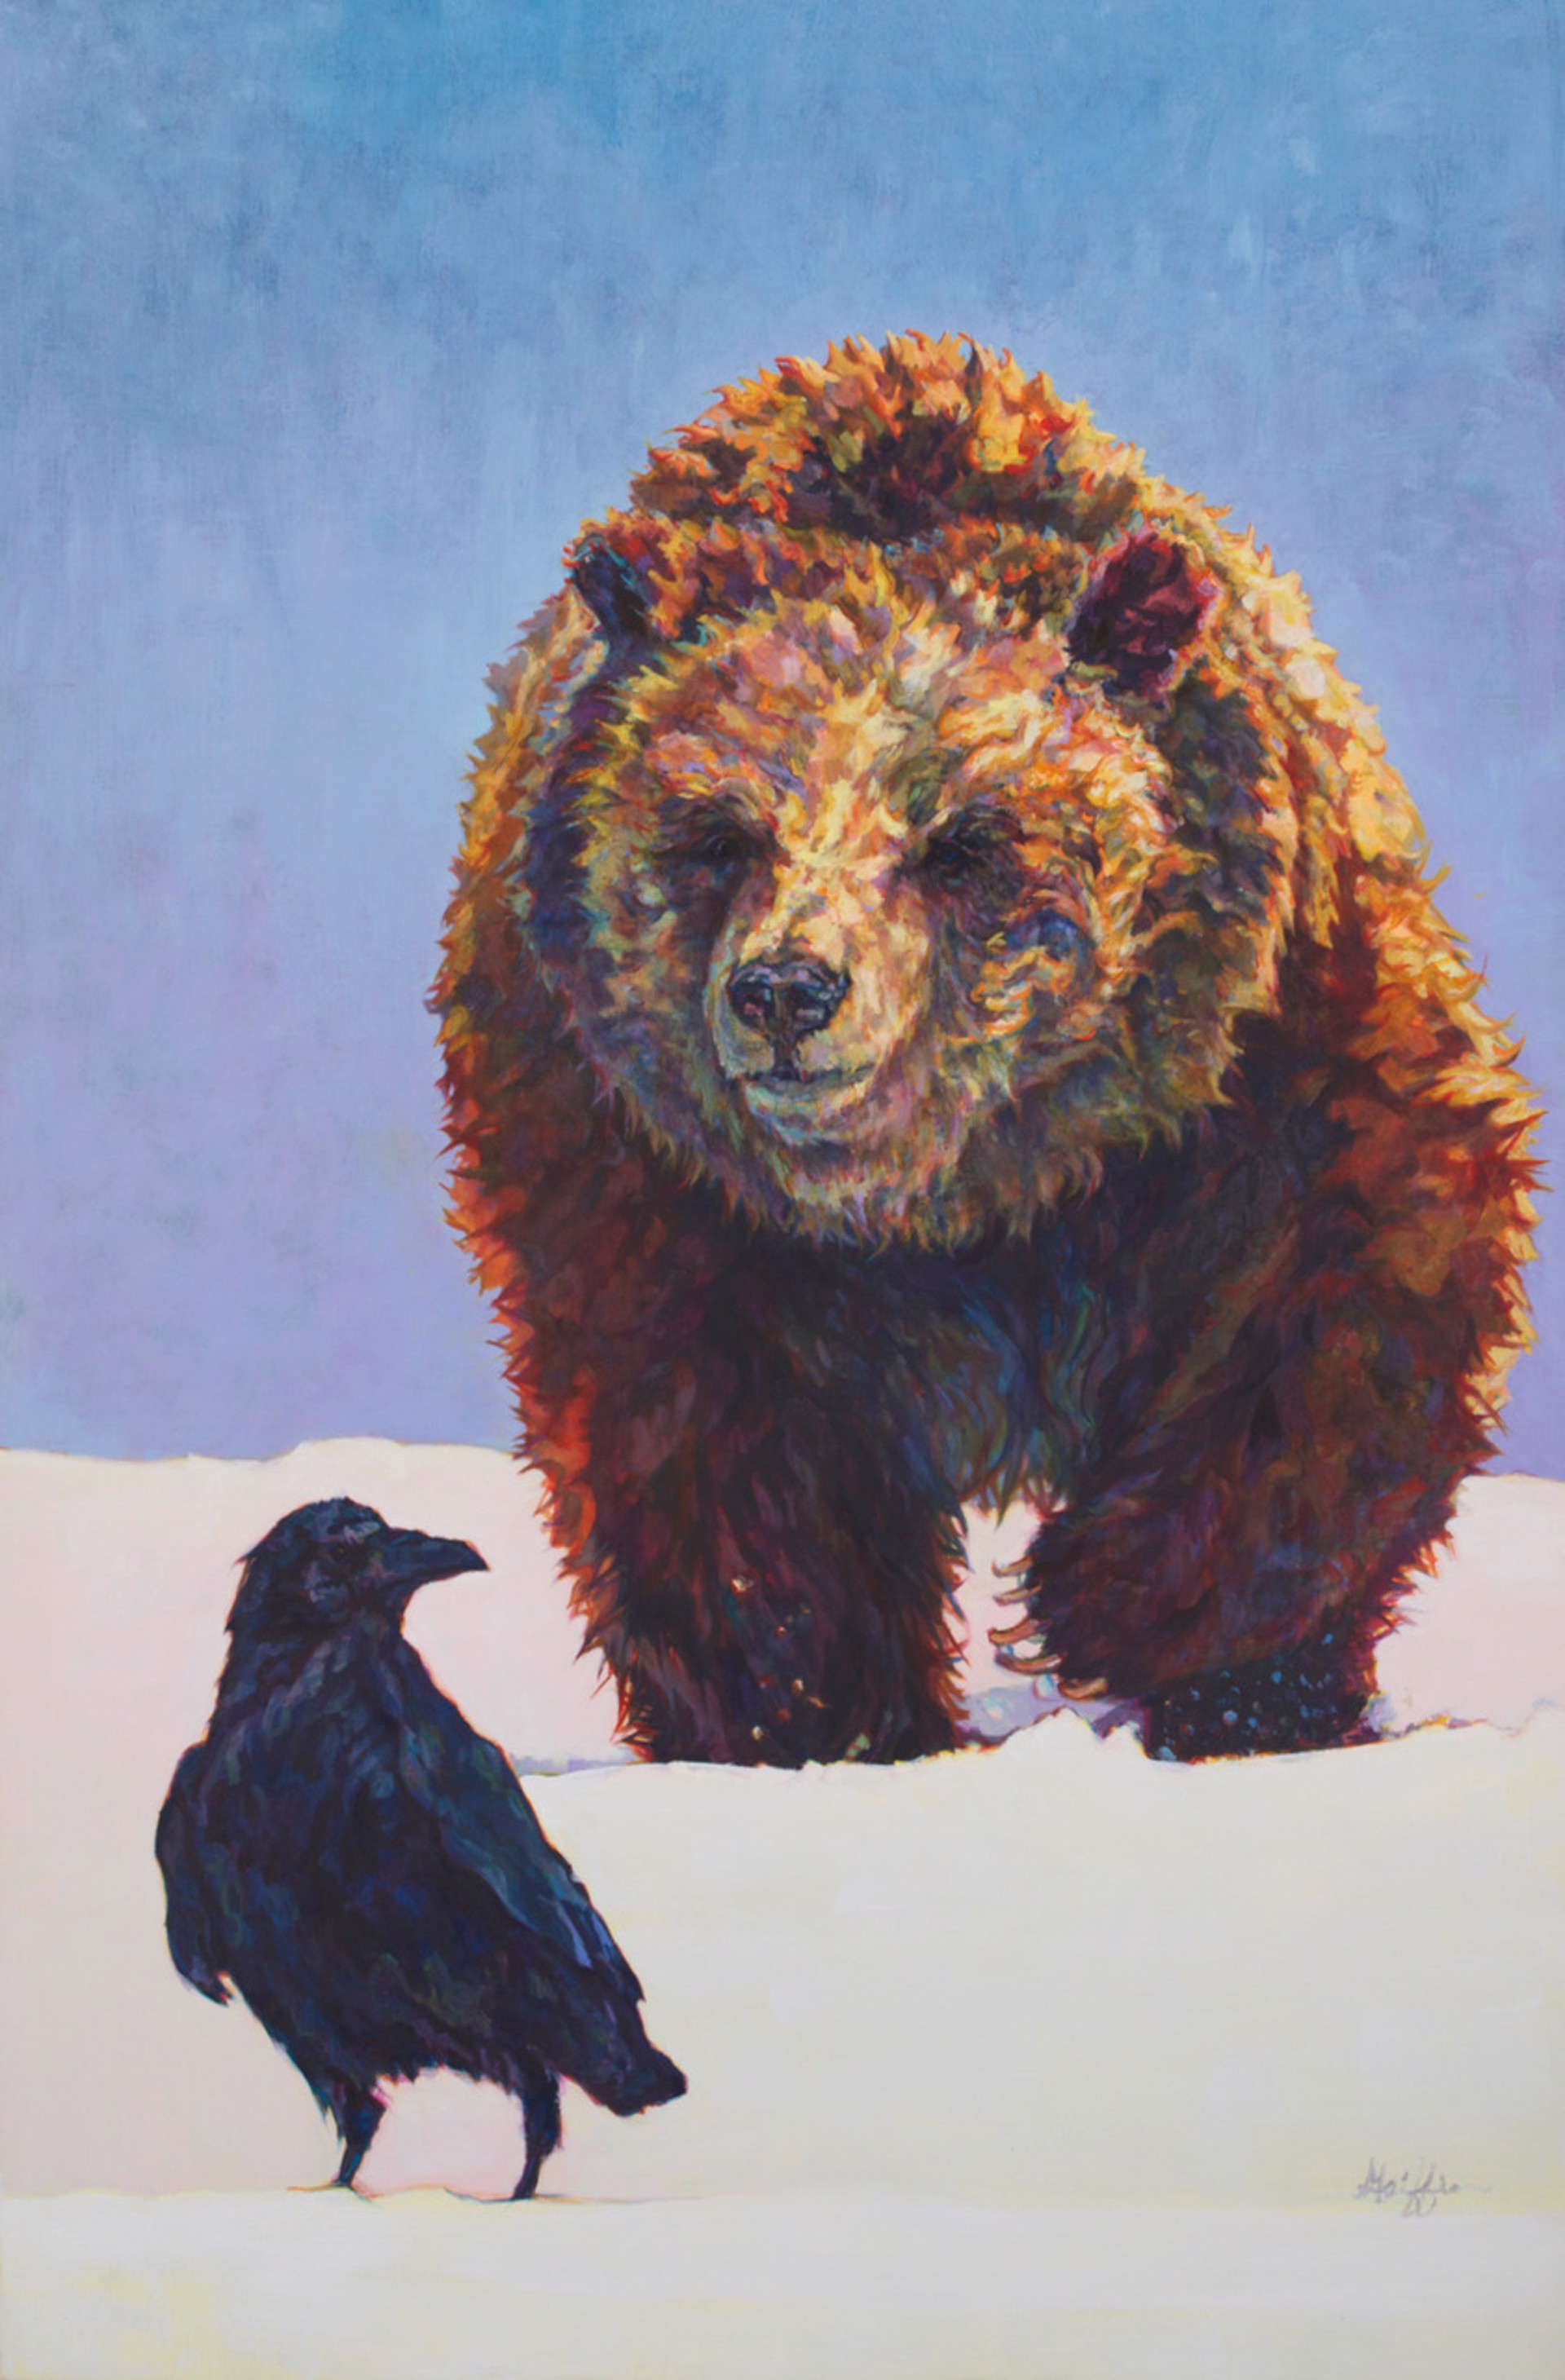 Patricia Griffin Grizzly Bear And Raven Portrait In Oil On Linen, A Contemporary Fine Art Painting and Modern Wildlife Art Piece Available At Gallery Wild